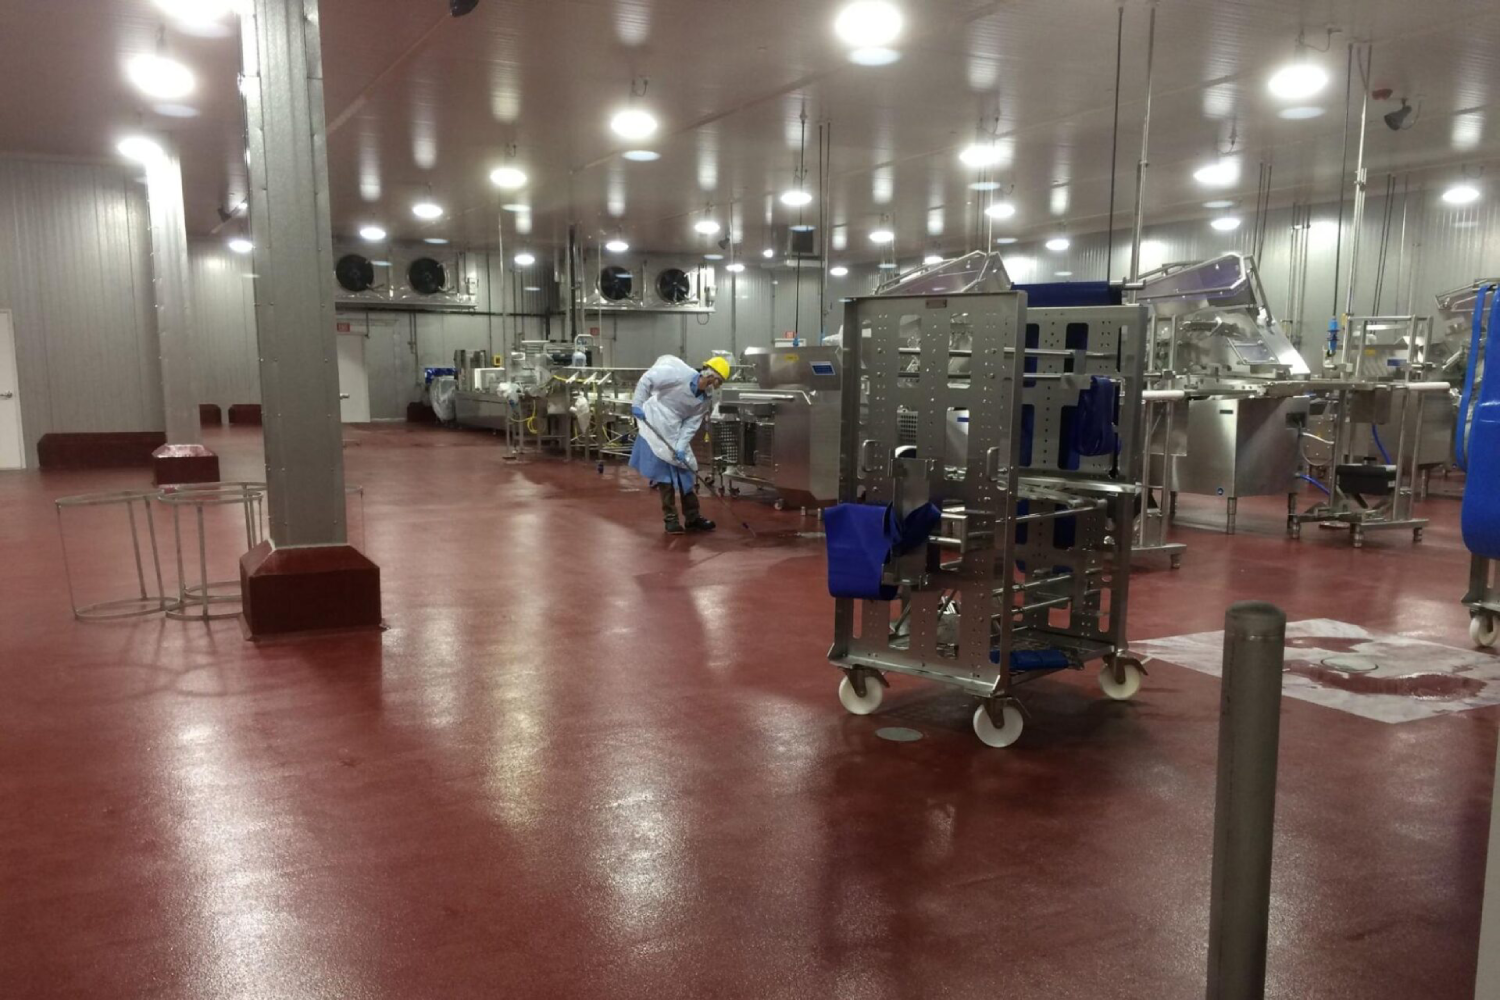 An example of industrial floor coatings in Chicago, IL